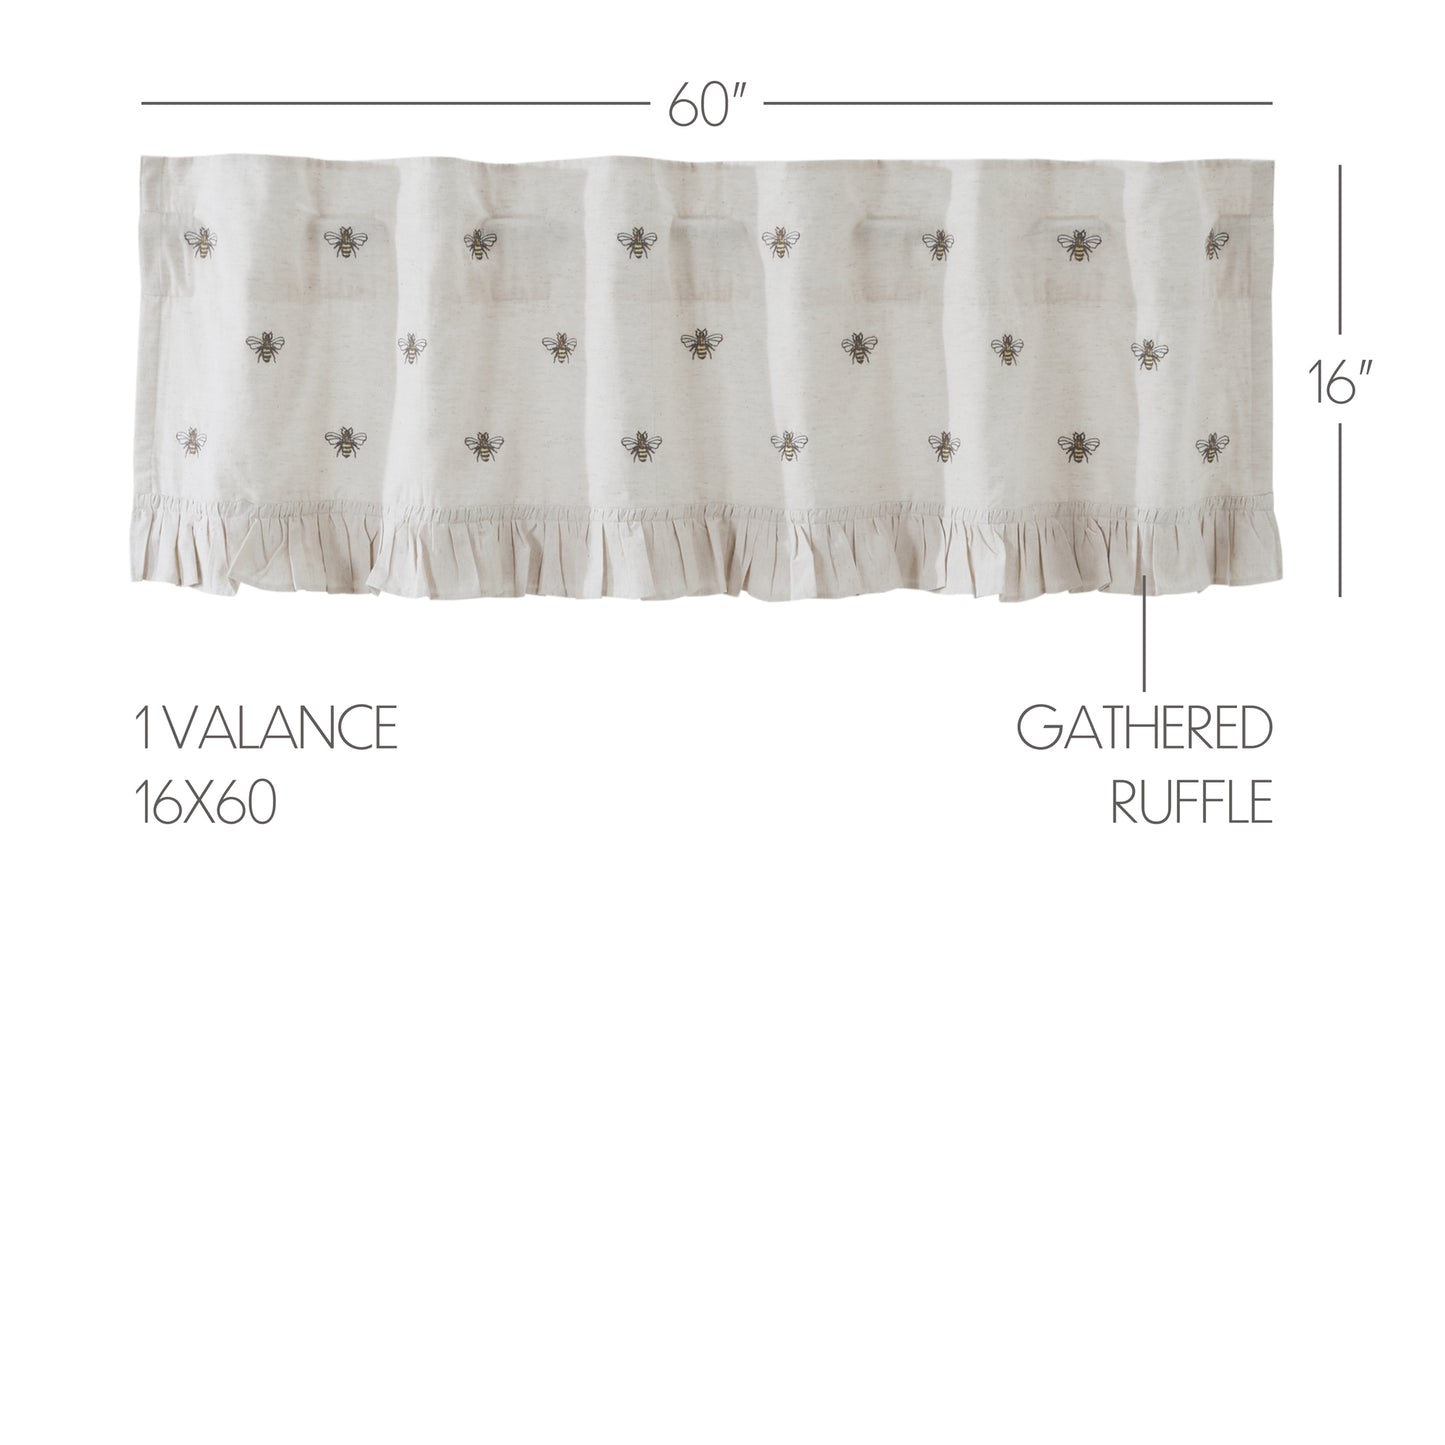 81264-Embroidered-Bee-Valance-16x60-image-1